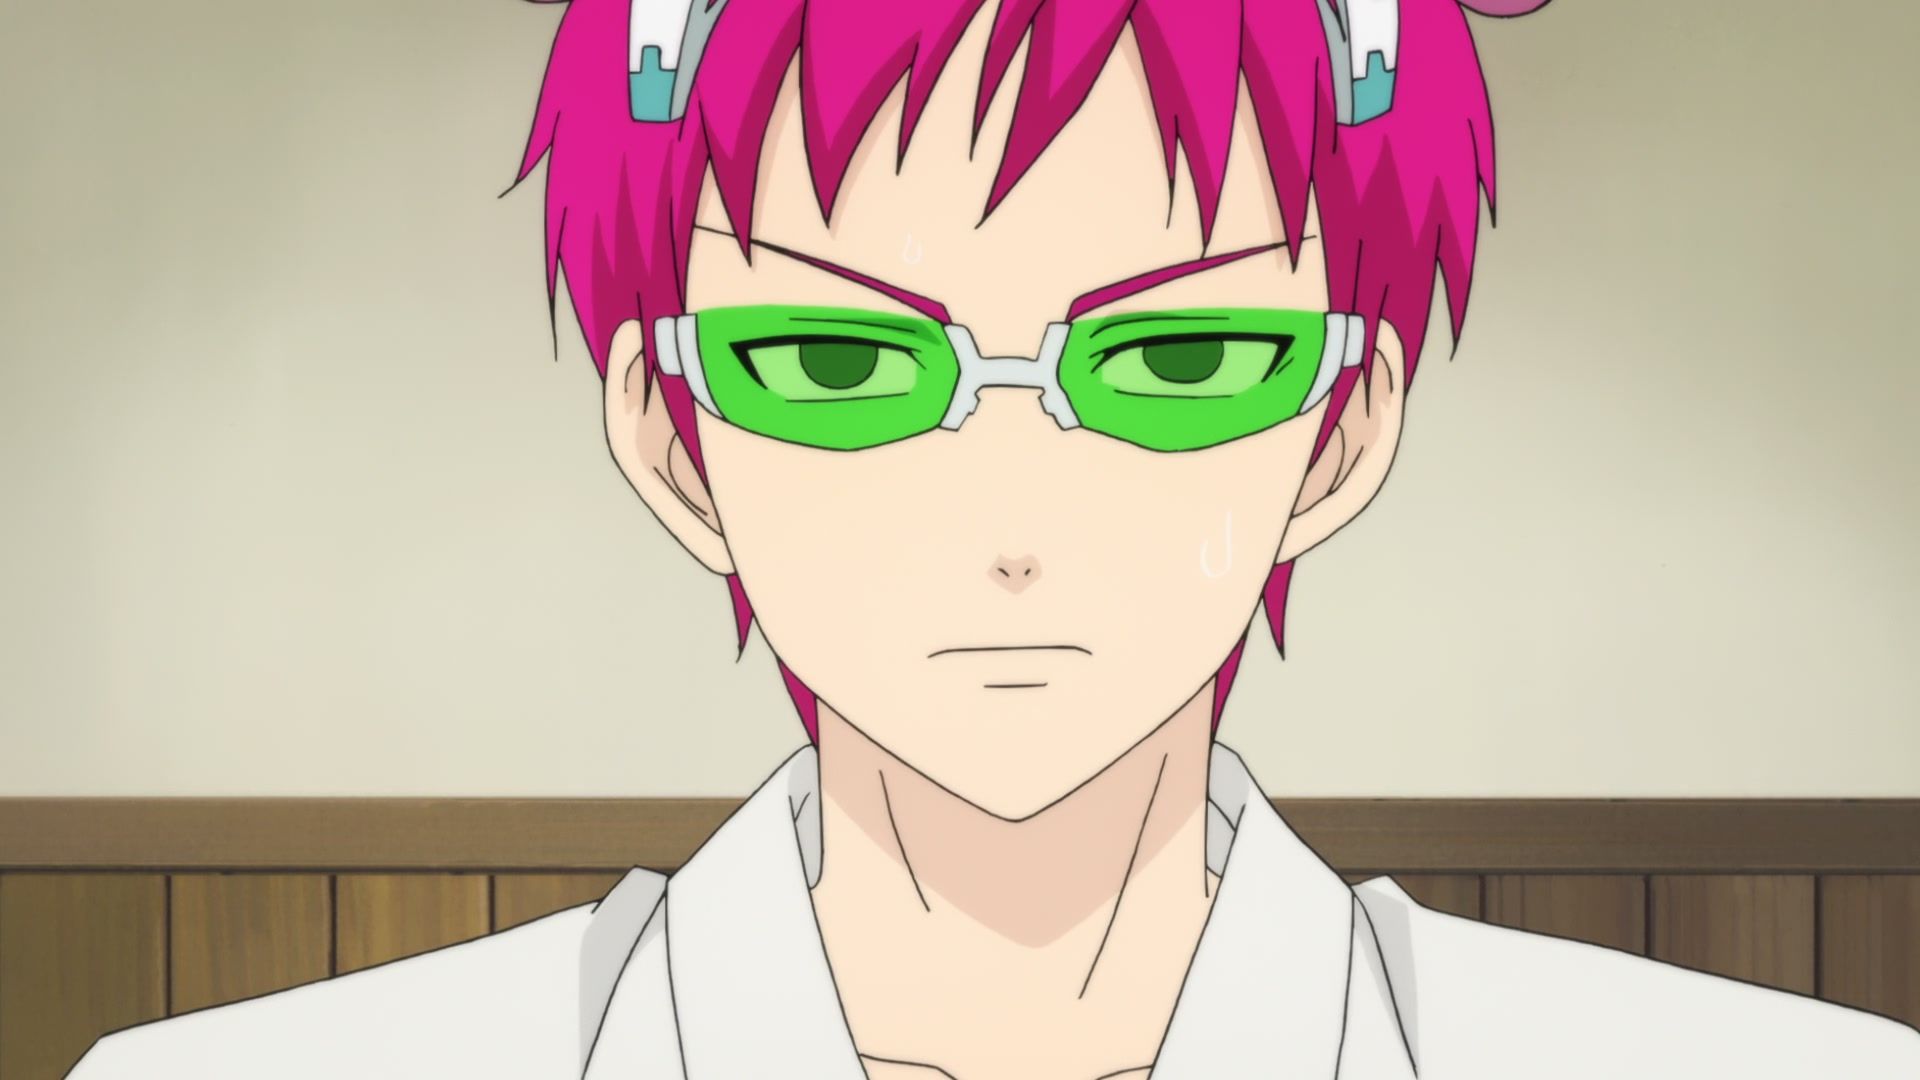 How To Watch The Disastrous Life Of Saiki K On Netflix